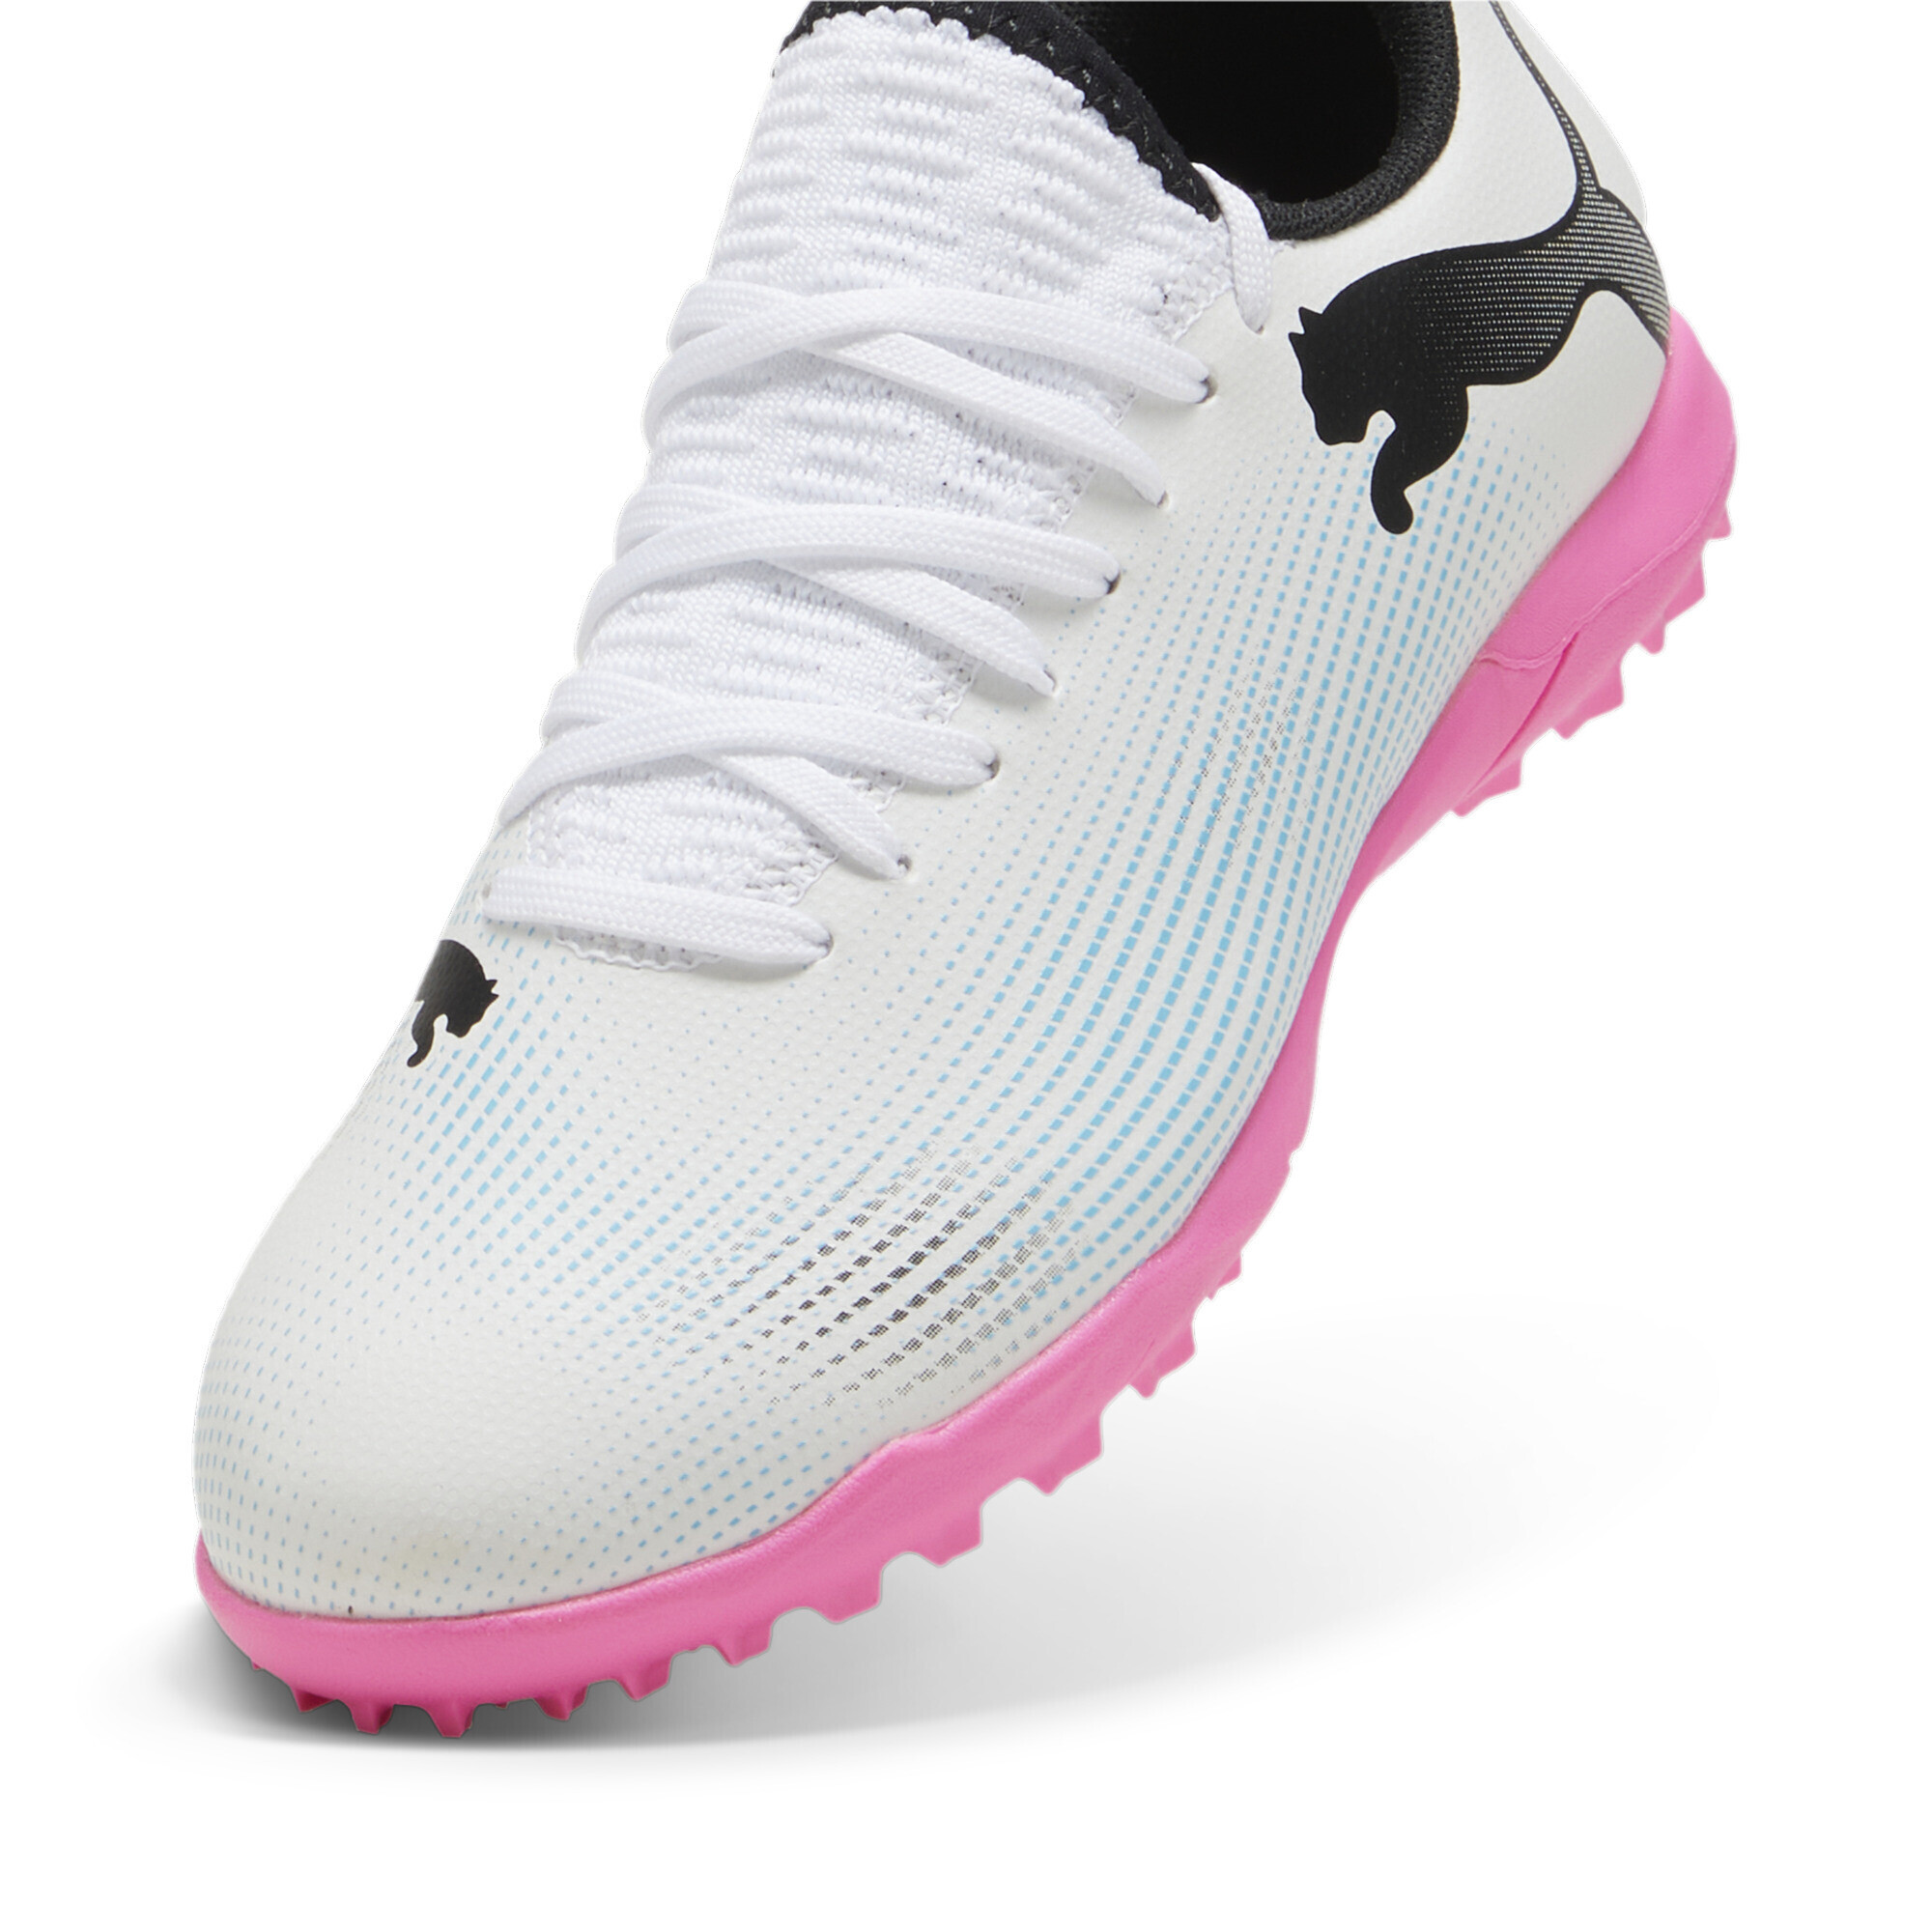 PUMA FUTURE 7 PLAY TT Youth Football Boots In White/Pink, Size EU 30